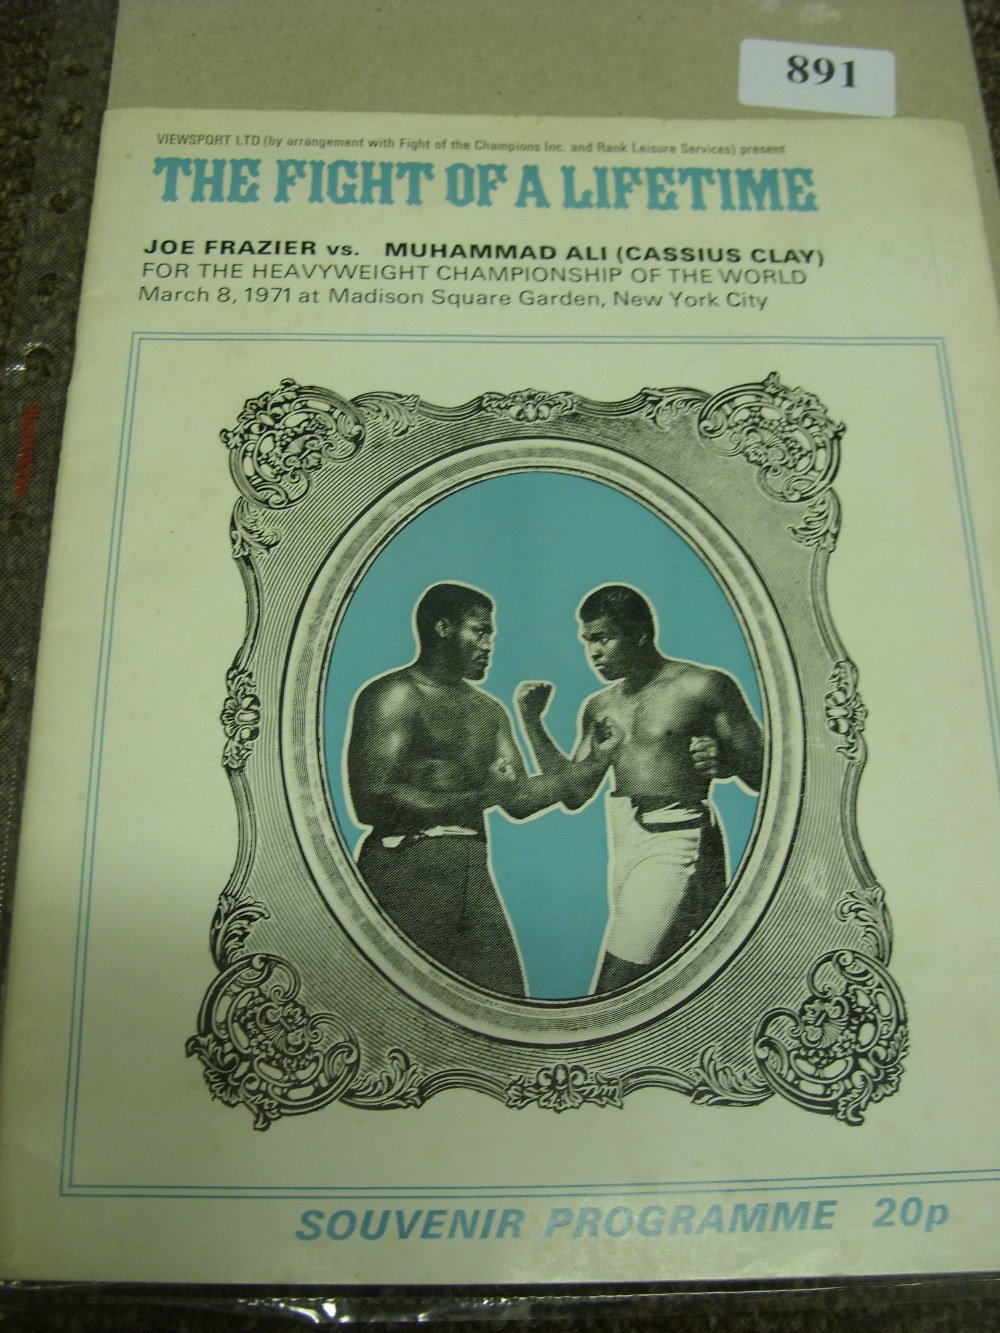 1971 Boxing, Joe Frazier v Muhammad Ali, a programme from the fight at Madison Square Garden on 08/